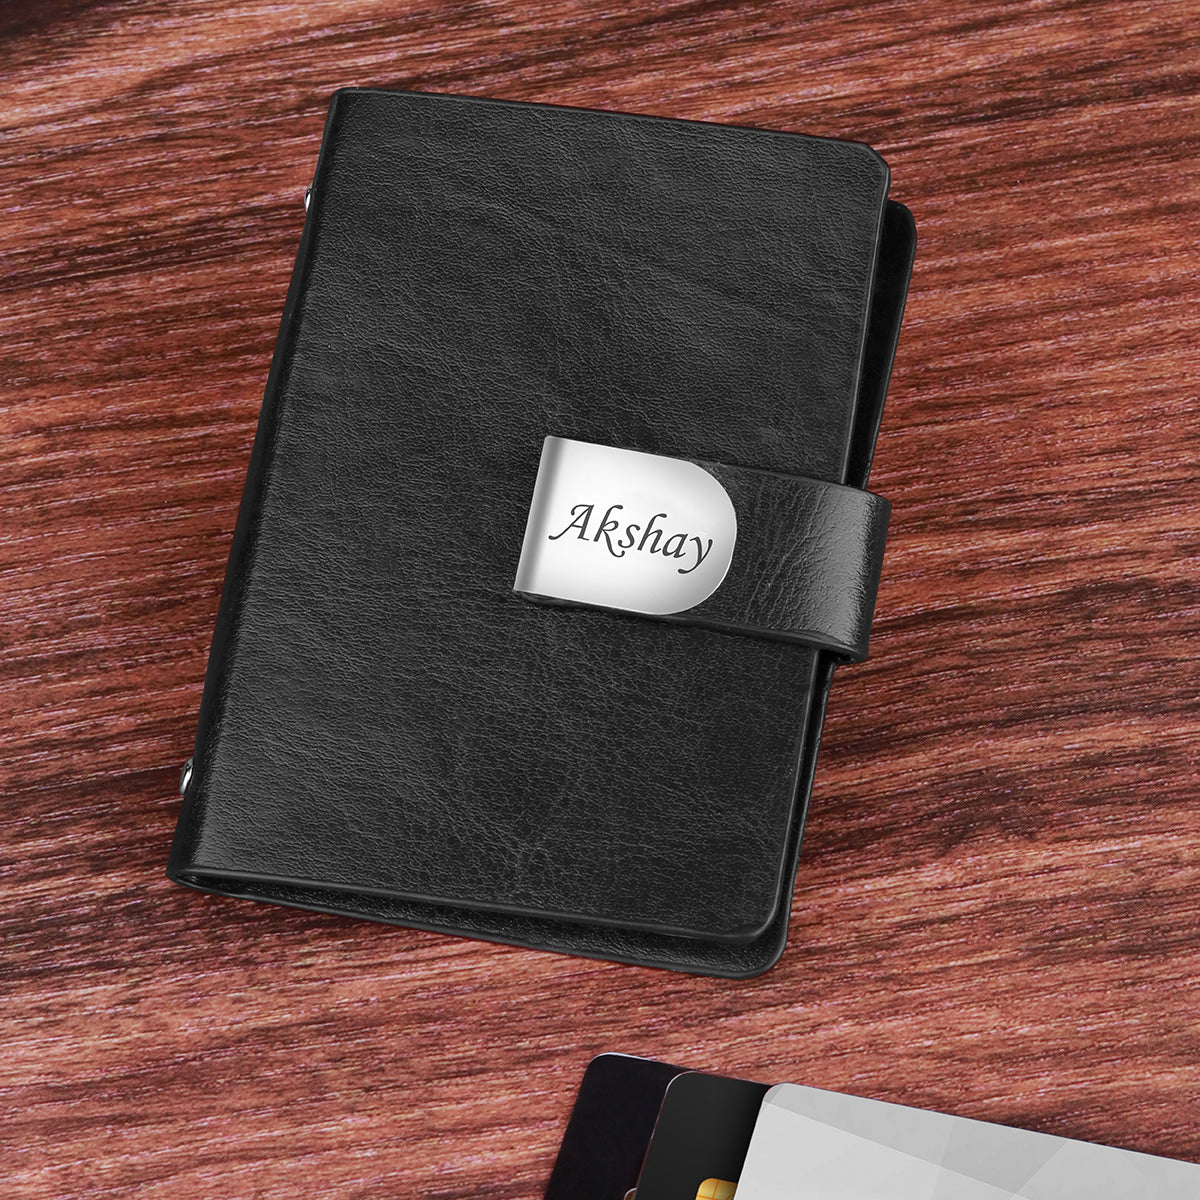 Personalized Premium Leather Bi-Fold Cardholder With Name